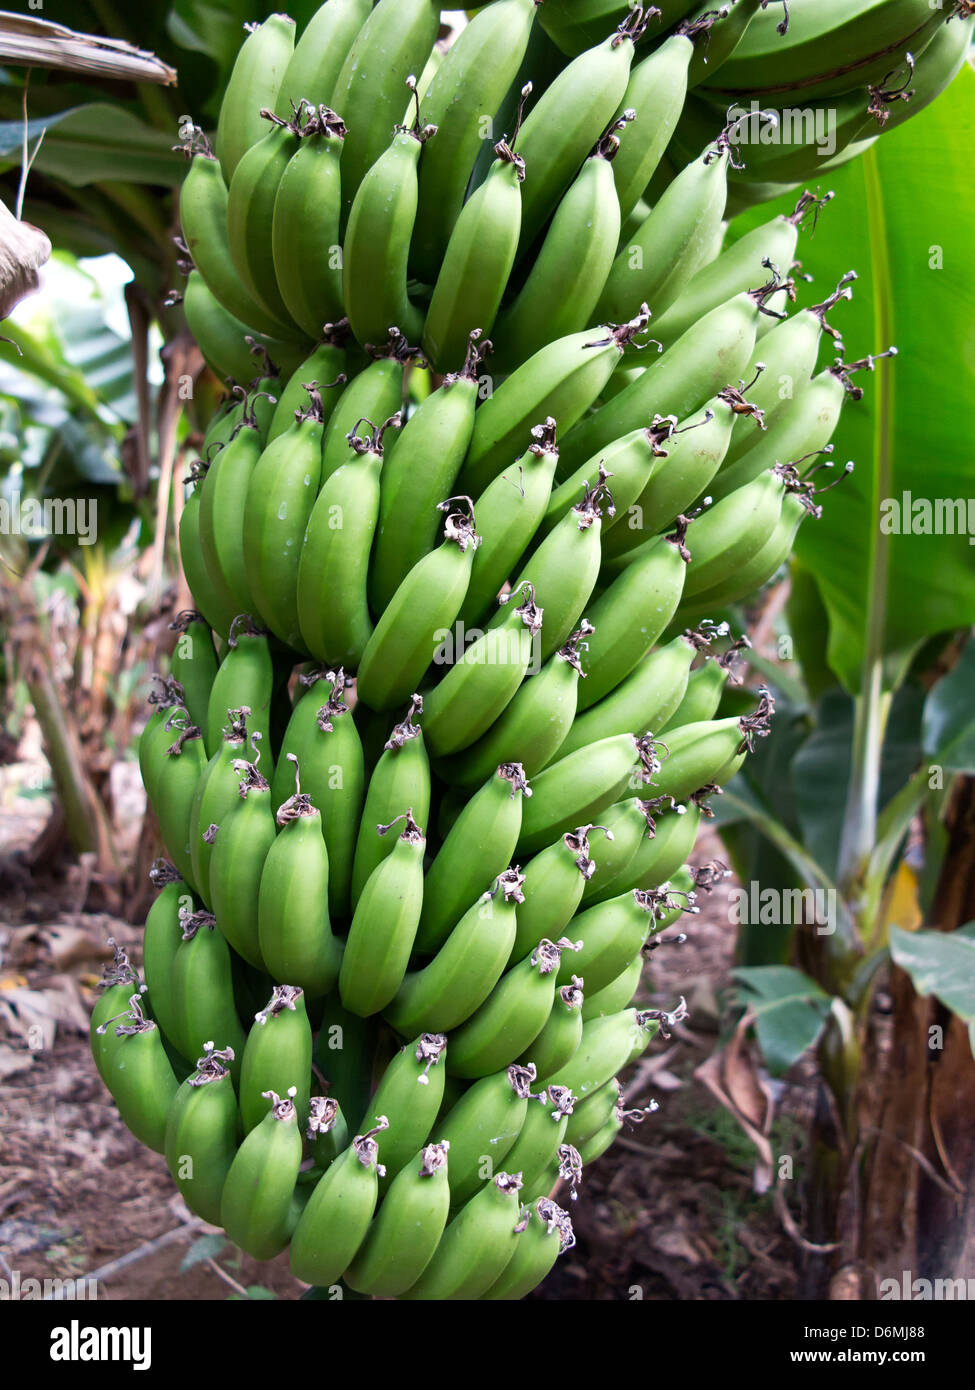 Banana plants growing in greenhouse in the area of the Anti Atlas mountains near Taroudannt. Stock Photo